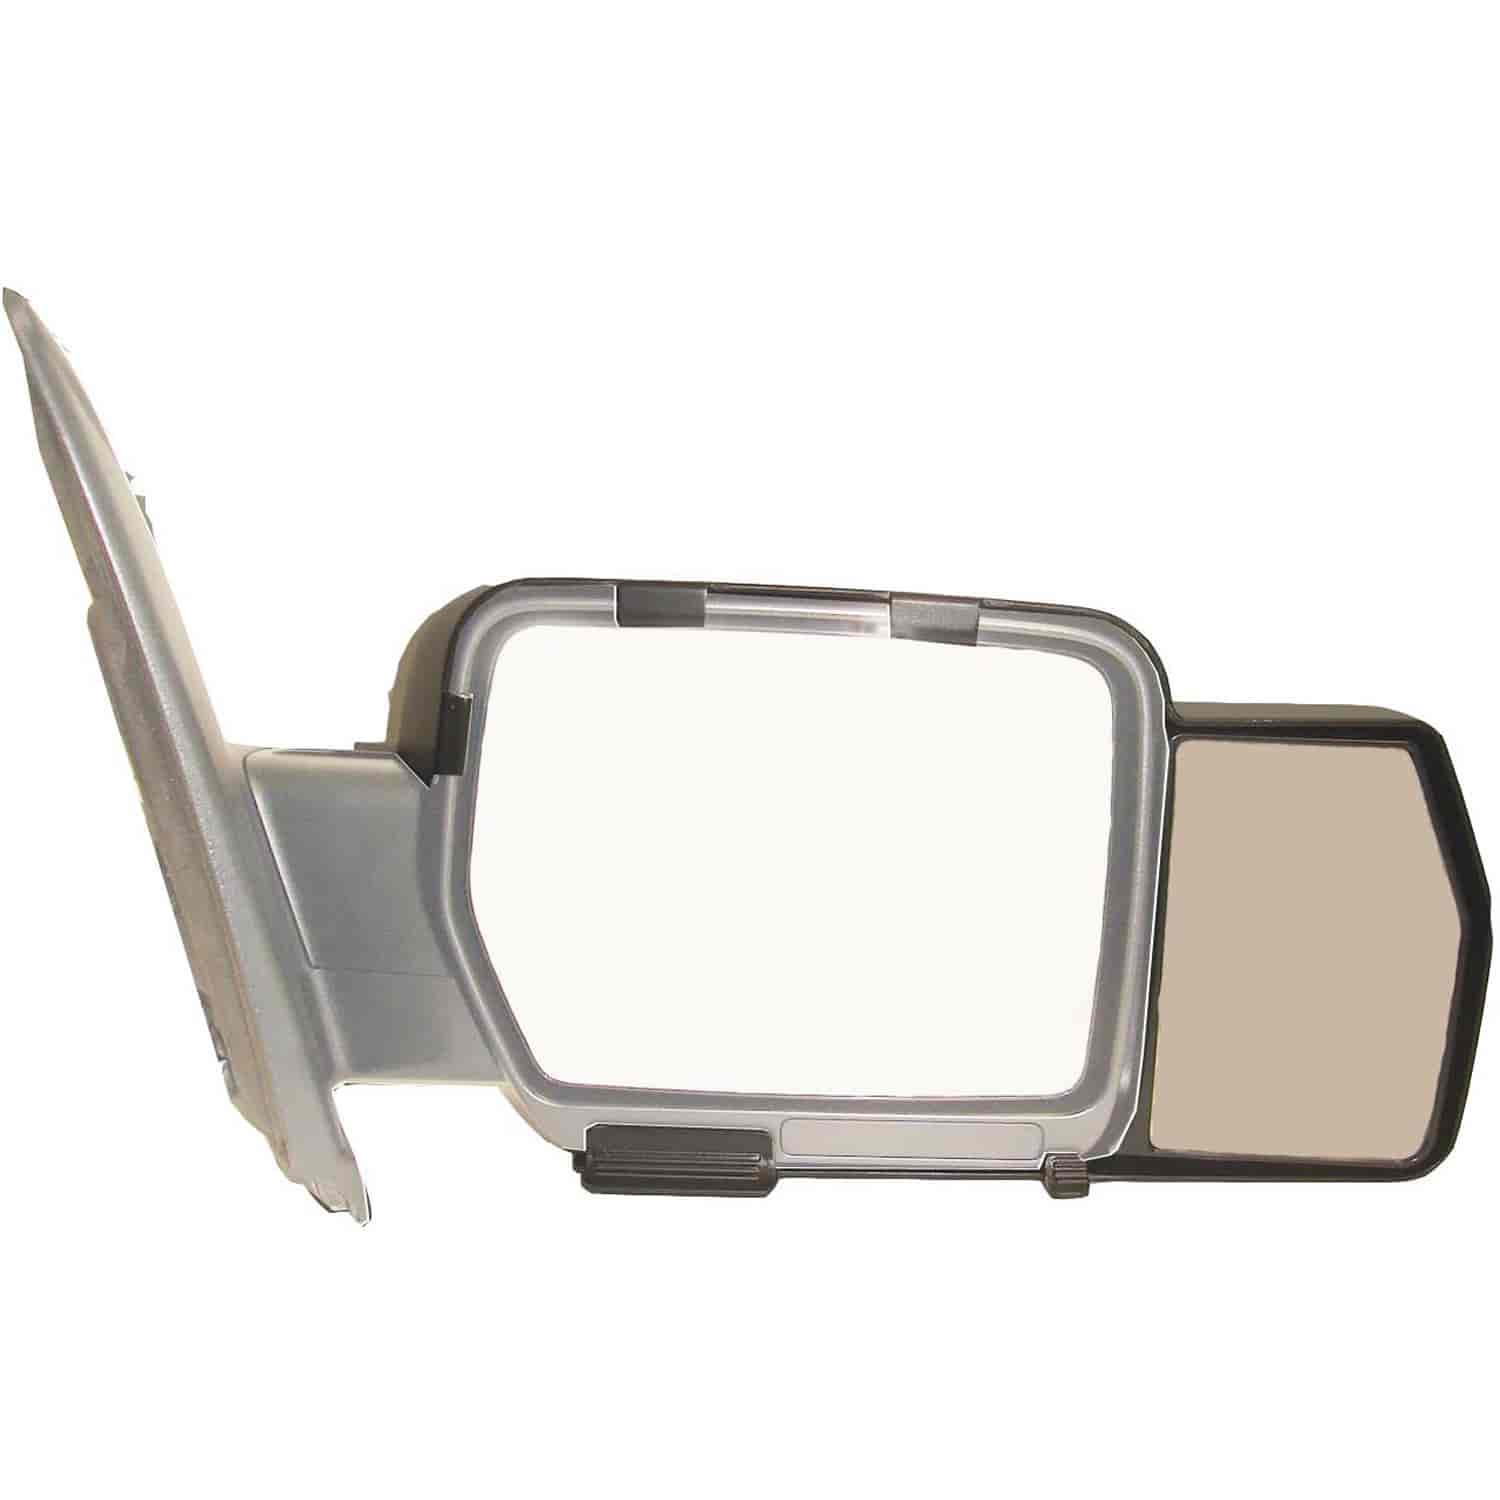 Snap-On Towing Mirrors Fits 2009 to 2014 Ford F150